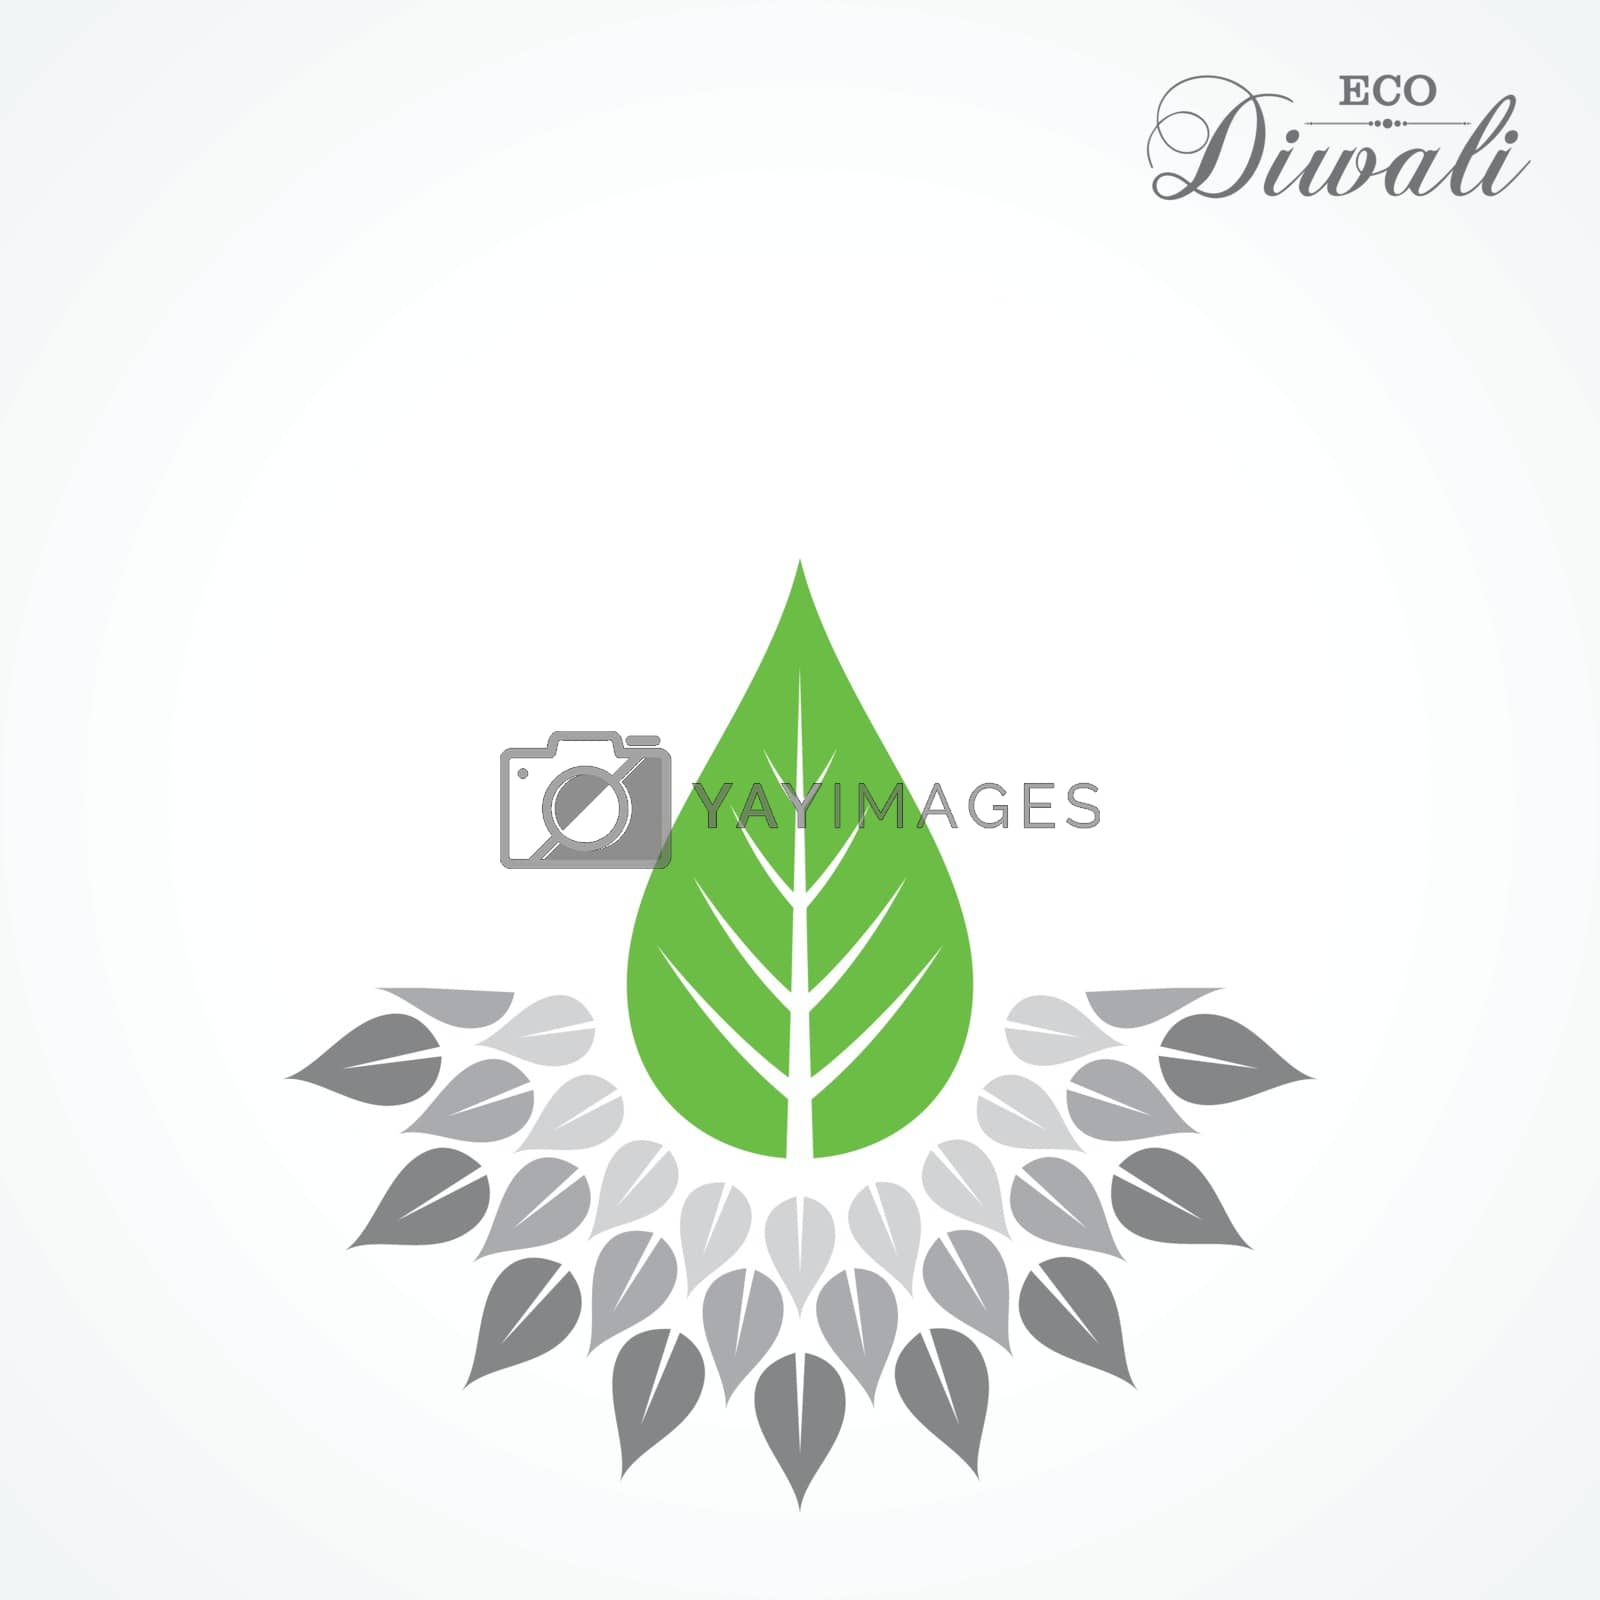 Royalty free image of Greeting for celebrate green diwali concept by graphicsdunia4you